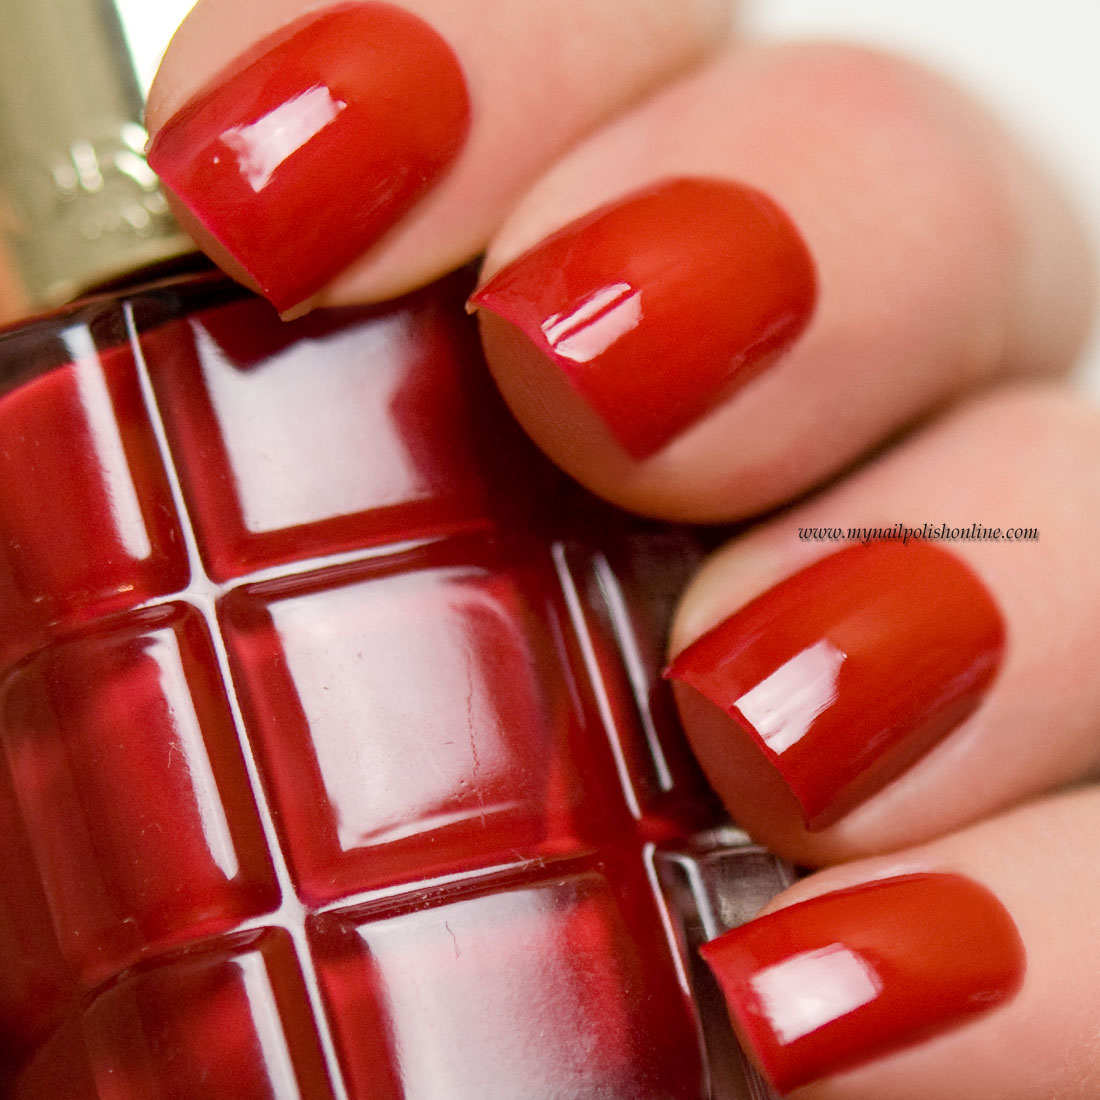 L'Oreal - Rouge Amour - My Nail Polish Online